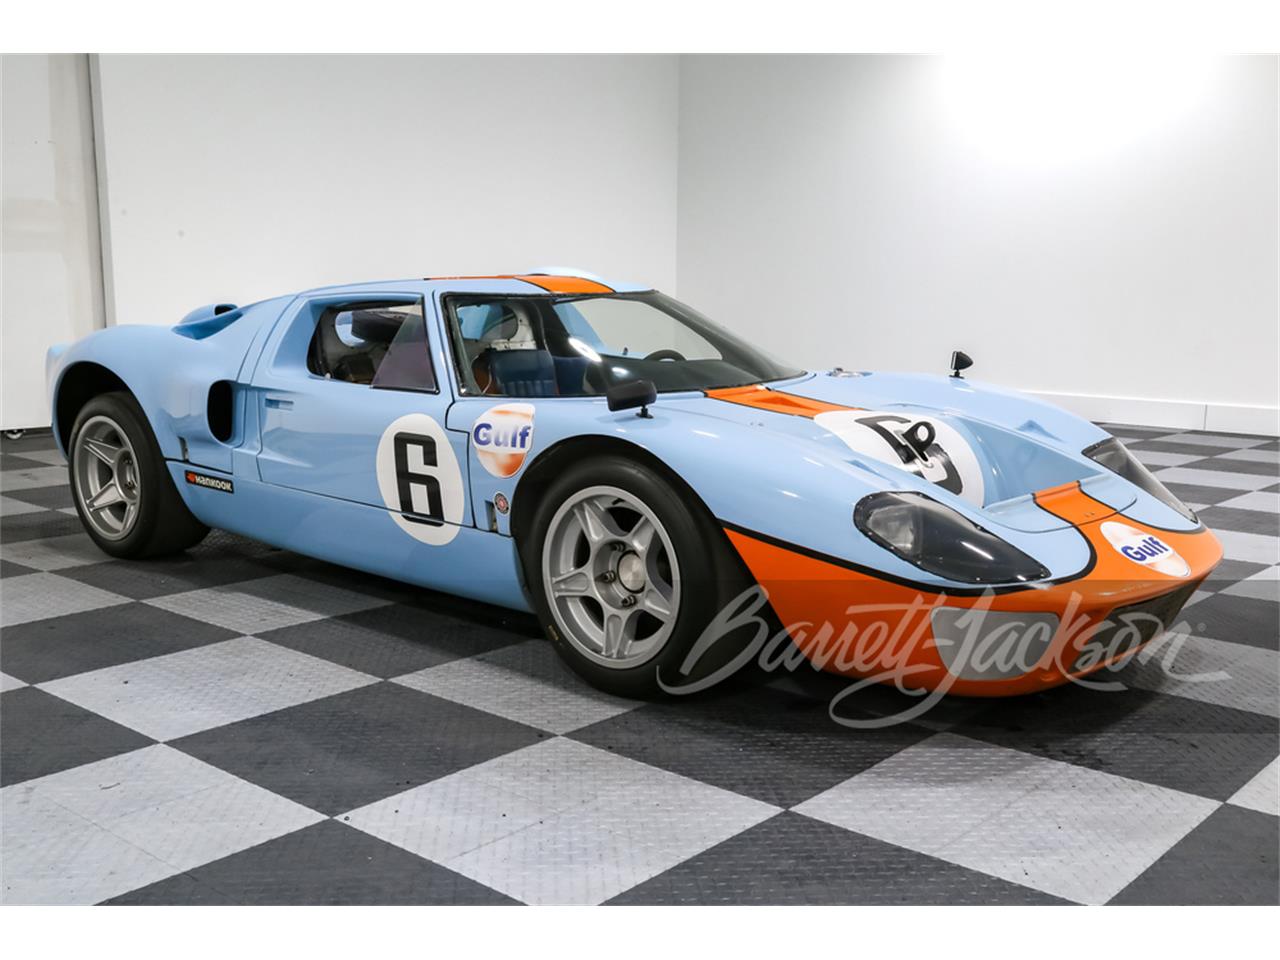 For Sale at Auction: 1967 Ford GT40 in Scottsdale, Arizona for sale in Scottsdale, AZ